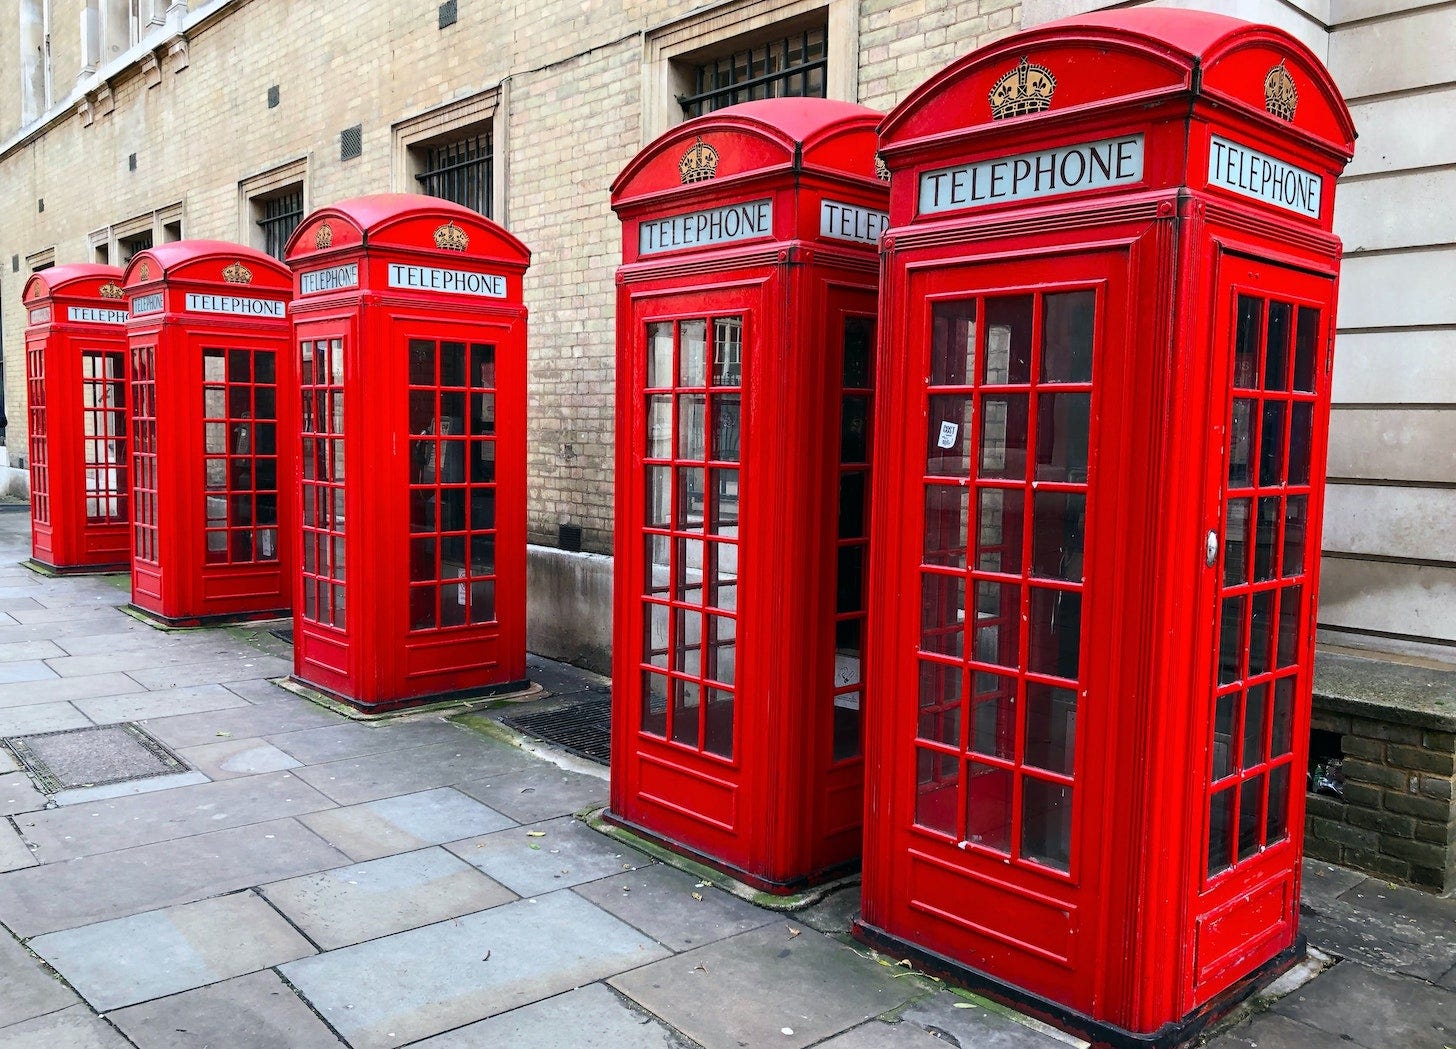 A London street scene with five red telephone boxes in a line.